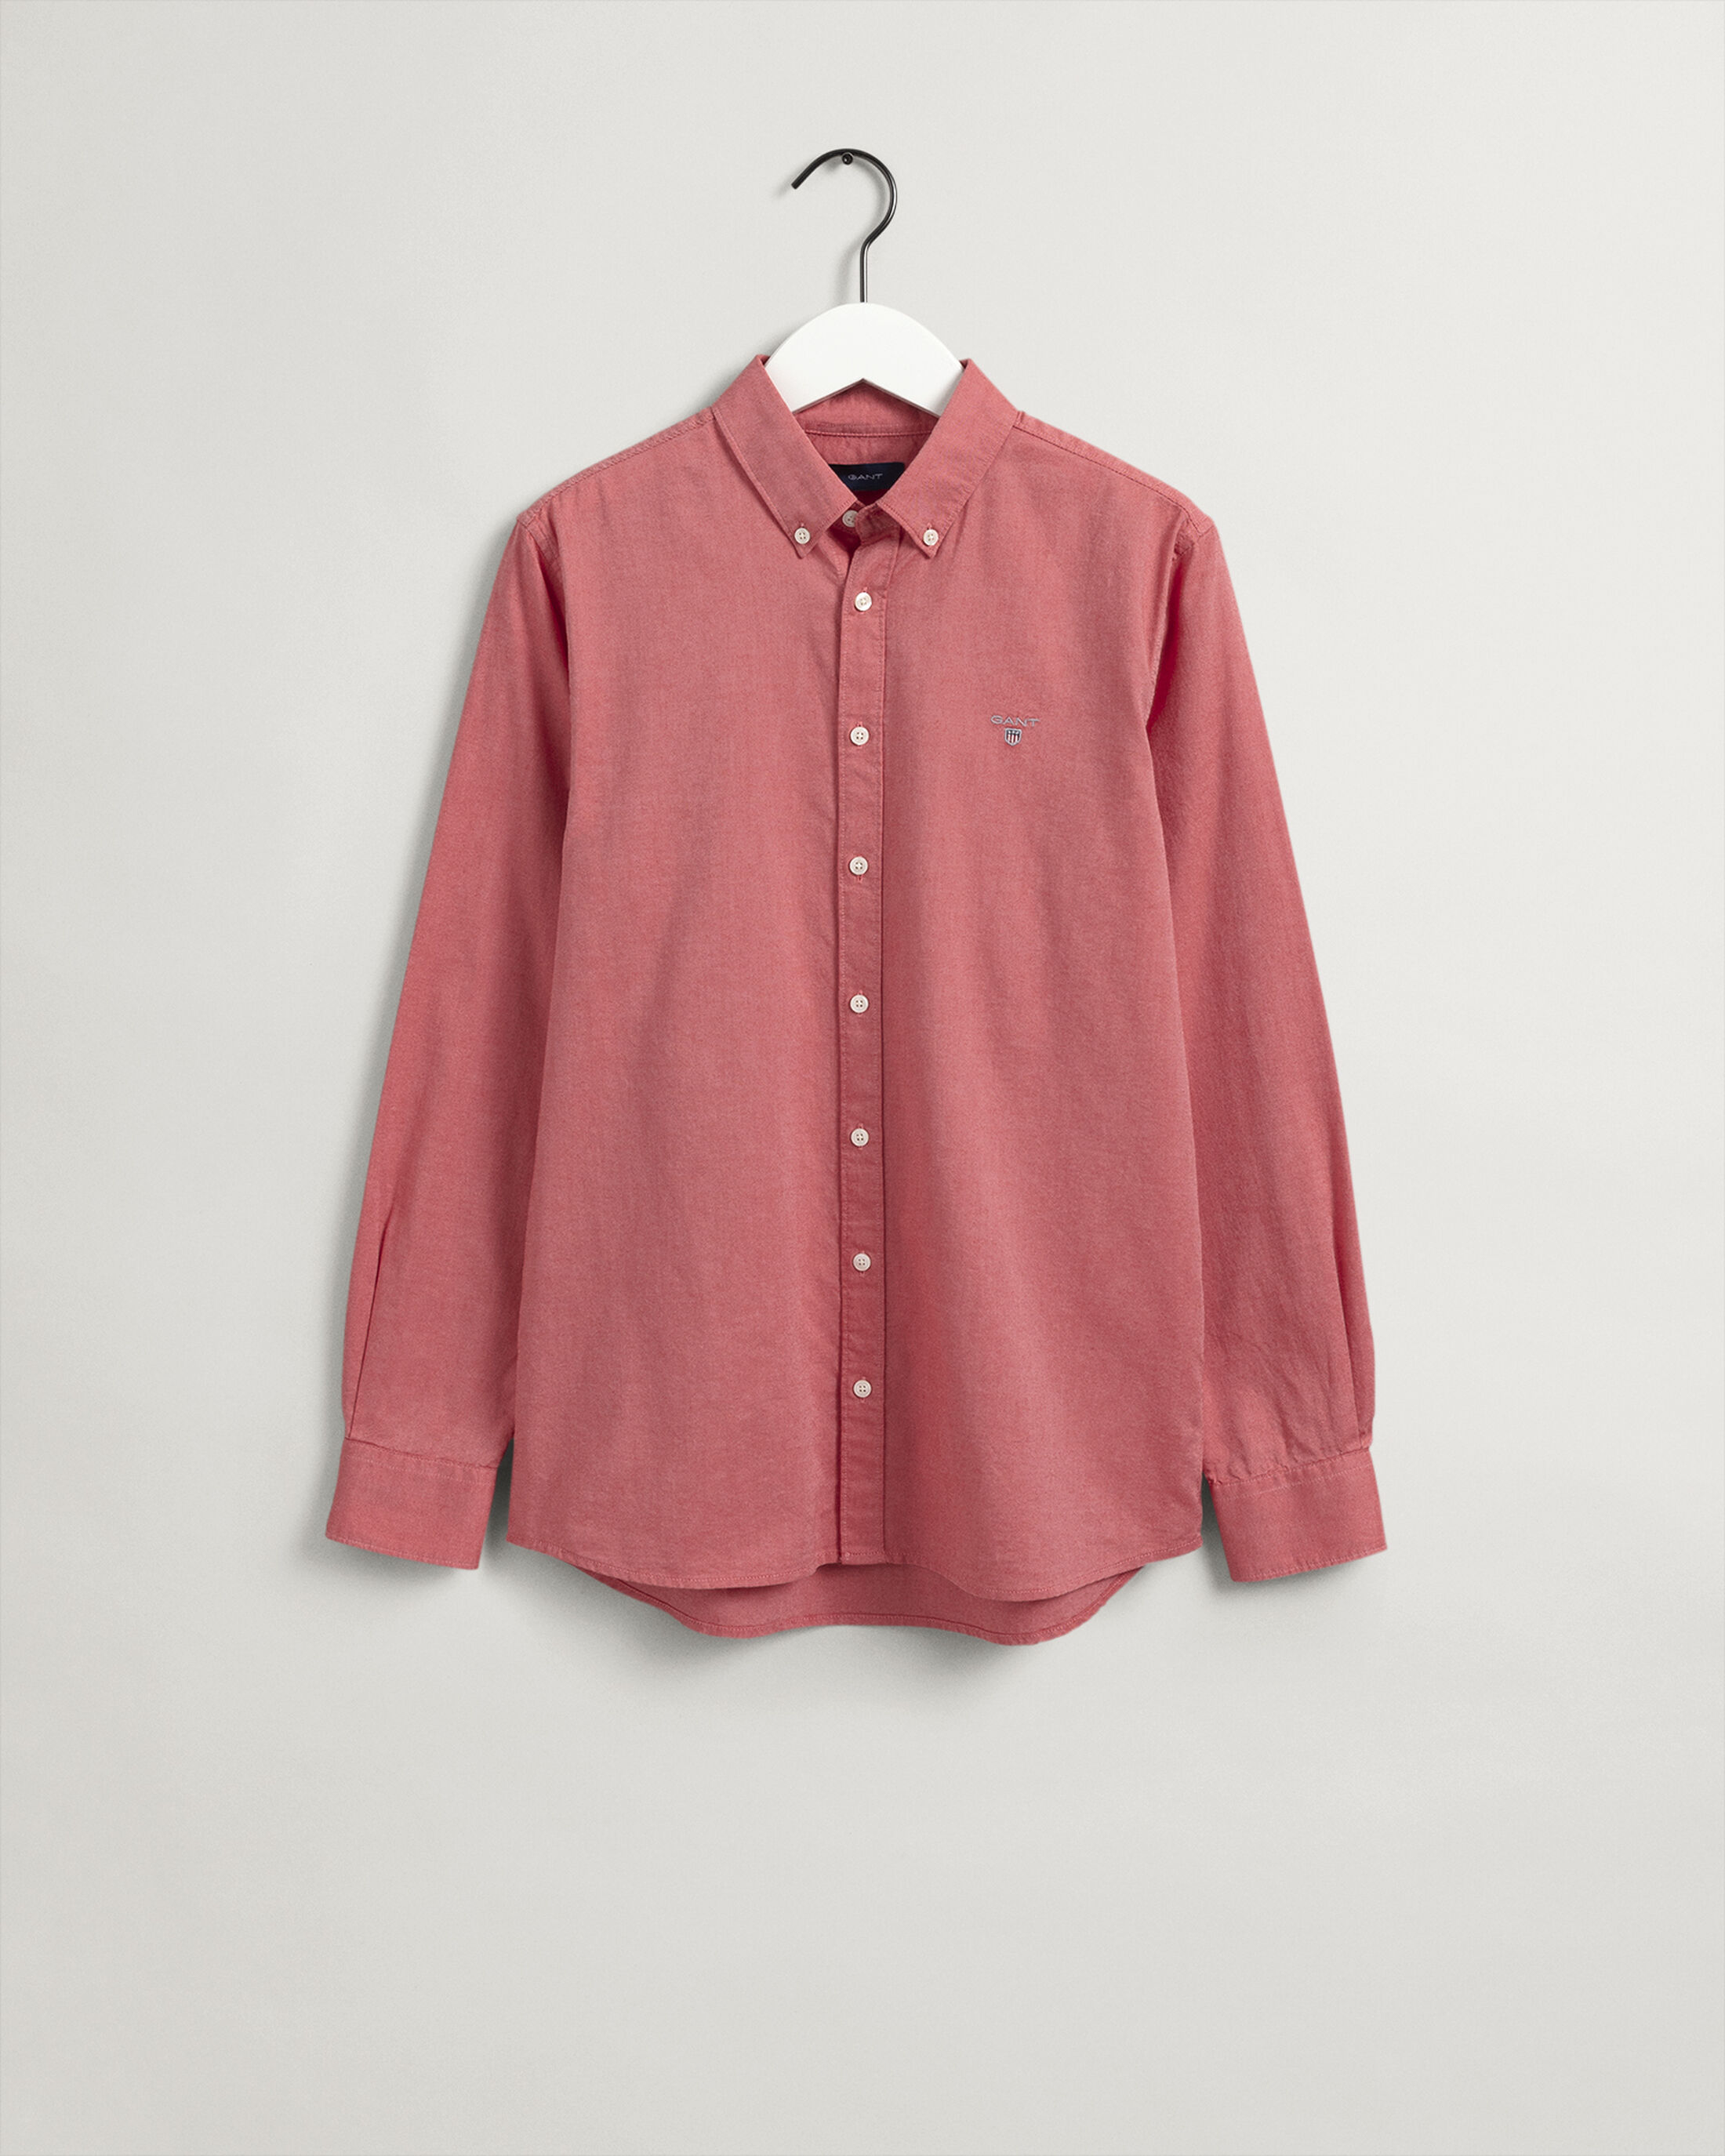  Teens Archive Oxford Shirt 